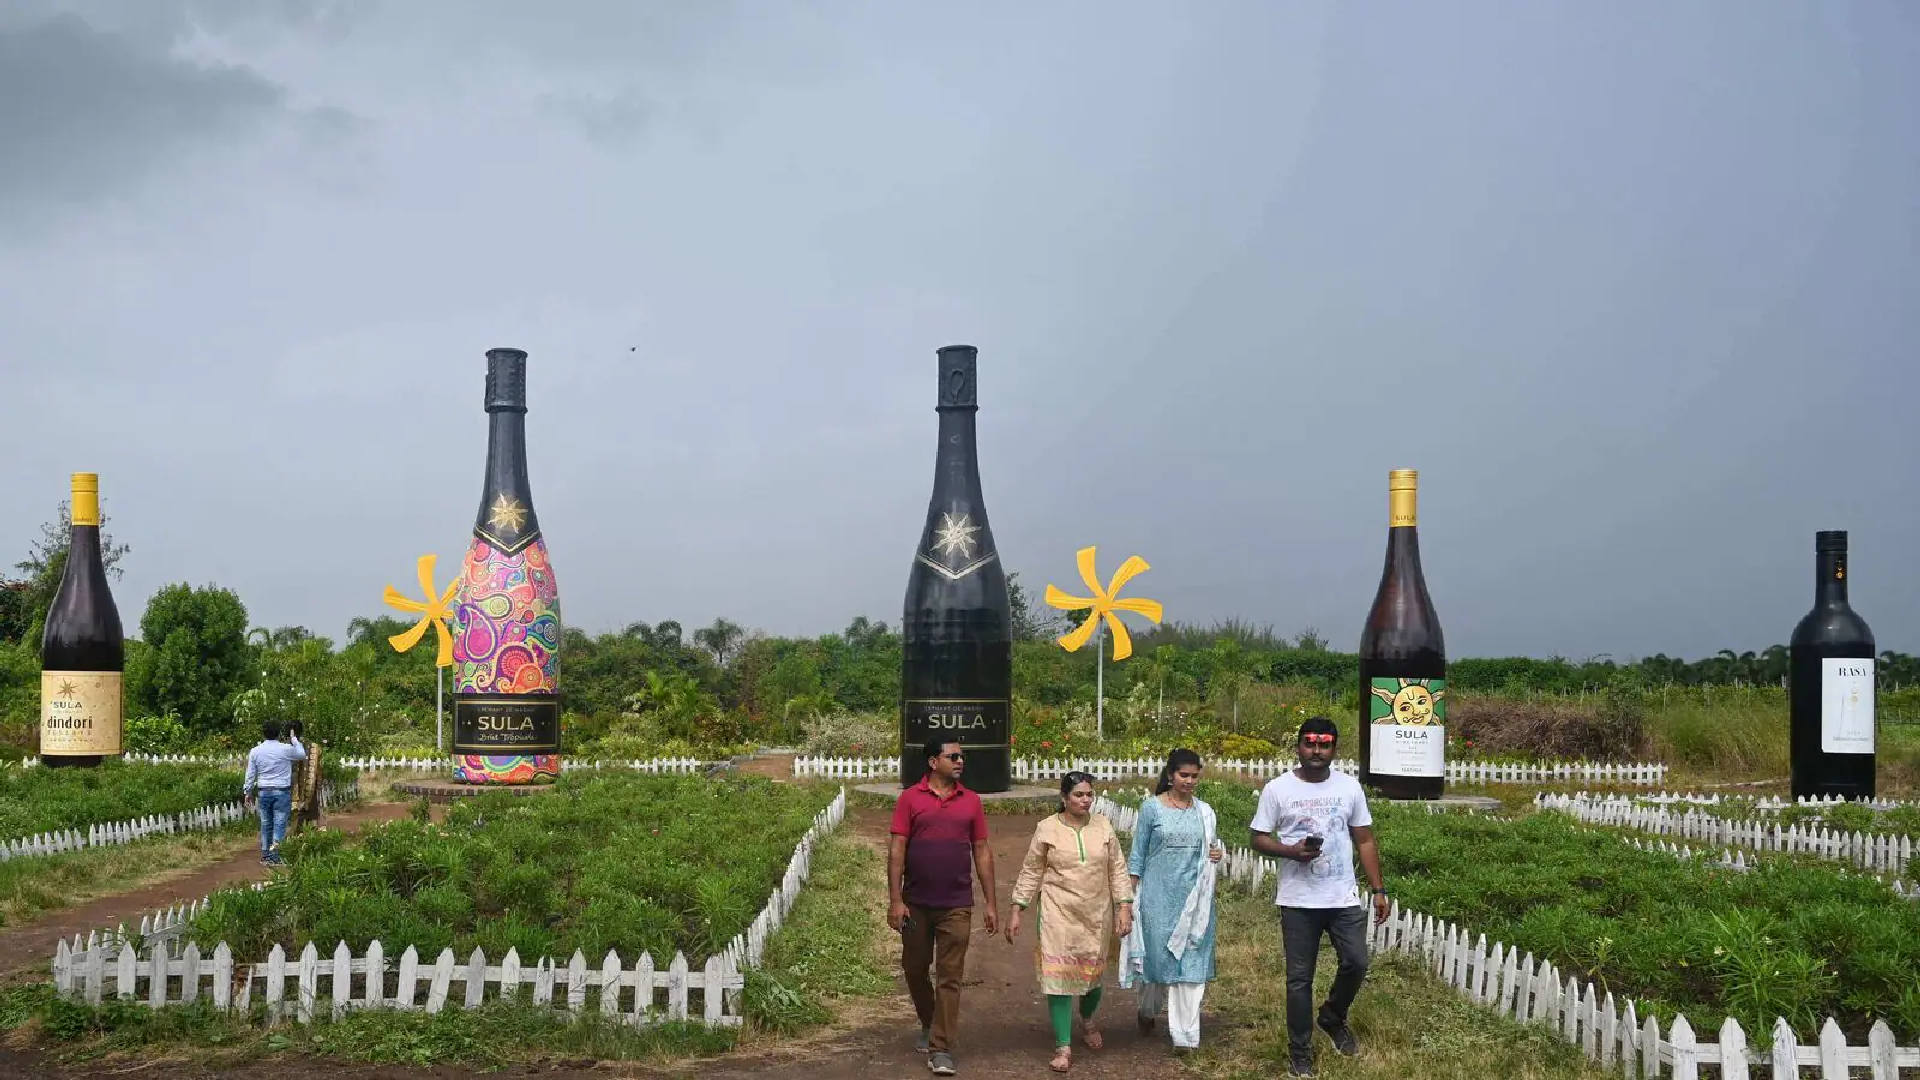 Visitors walk past giant sized wine bottles during a winery tour and wine tasting session at the Sula Vineyards in Nashik